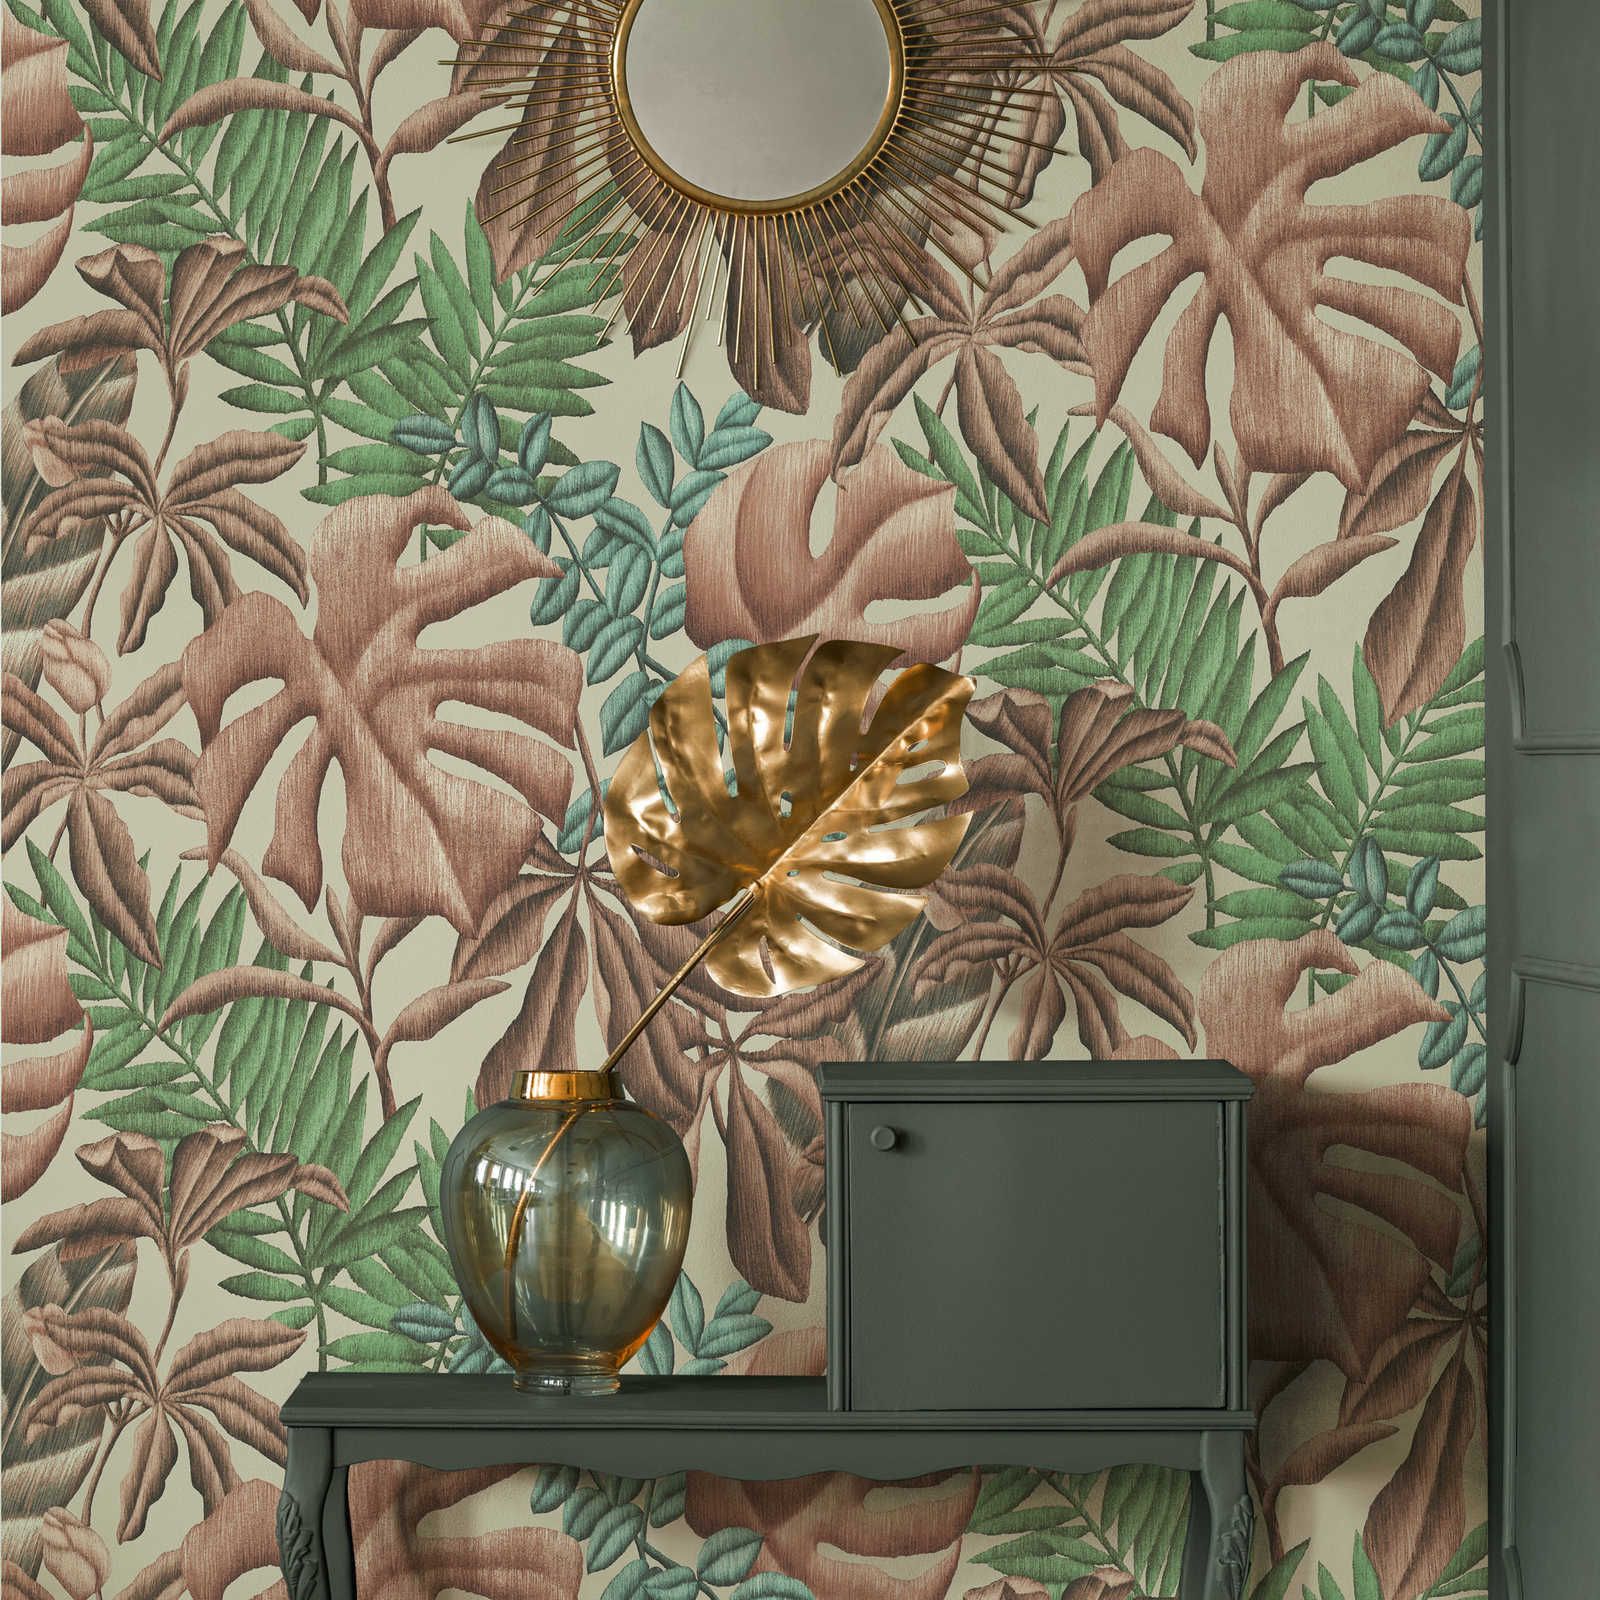 Leaf pattern non-woven wallpaper with banana leaves & fern - pink, green, cream
